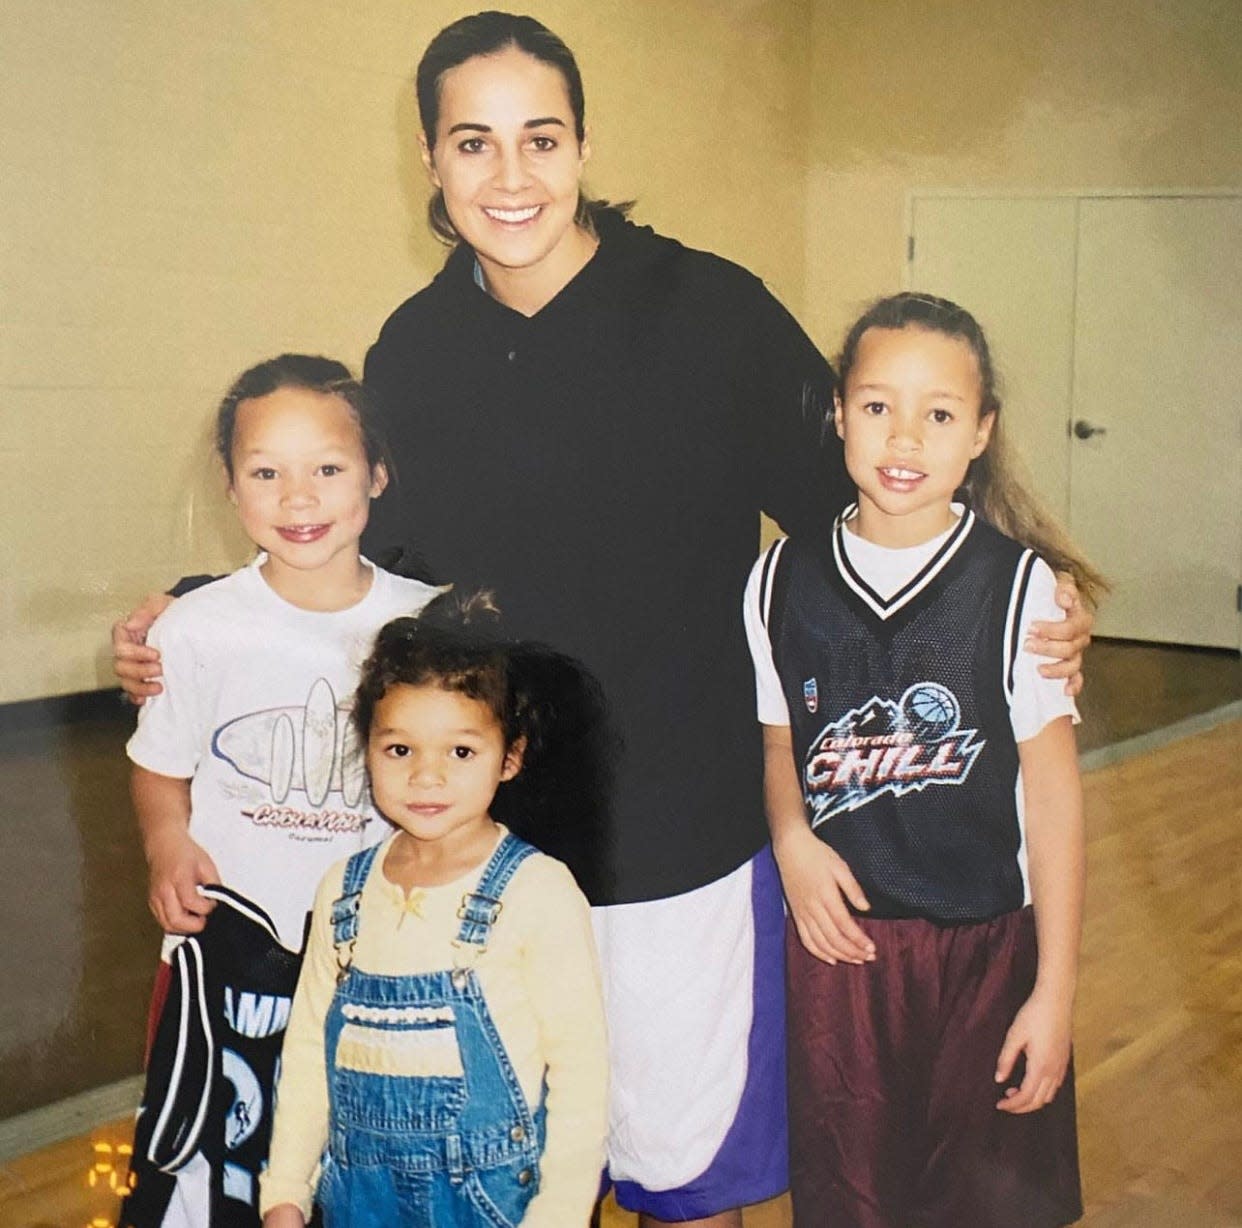 As girls Sophia Smith (center) and her sisters Savannah (left) and Gabby (right) were regulars at former Colorado State star and current WNBA coach Becky Hammon's games.